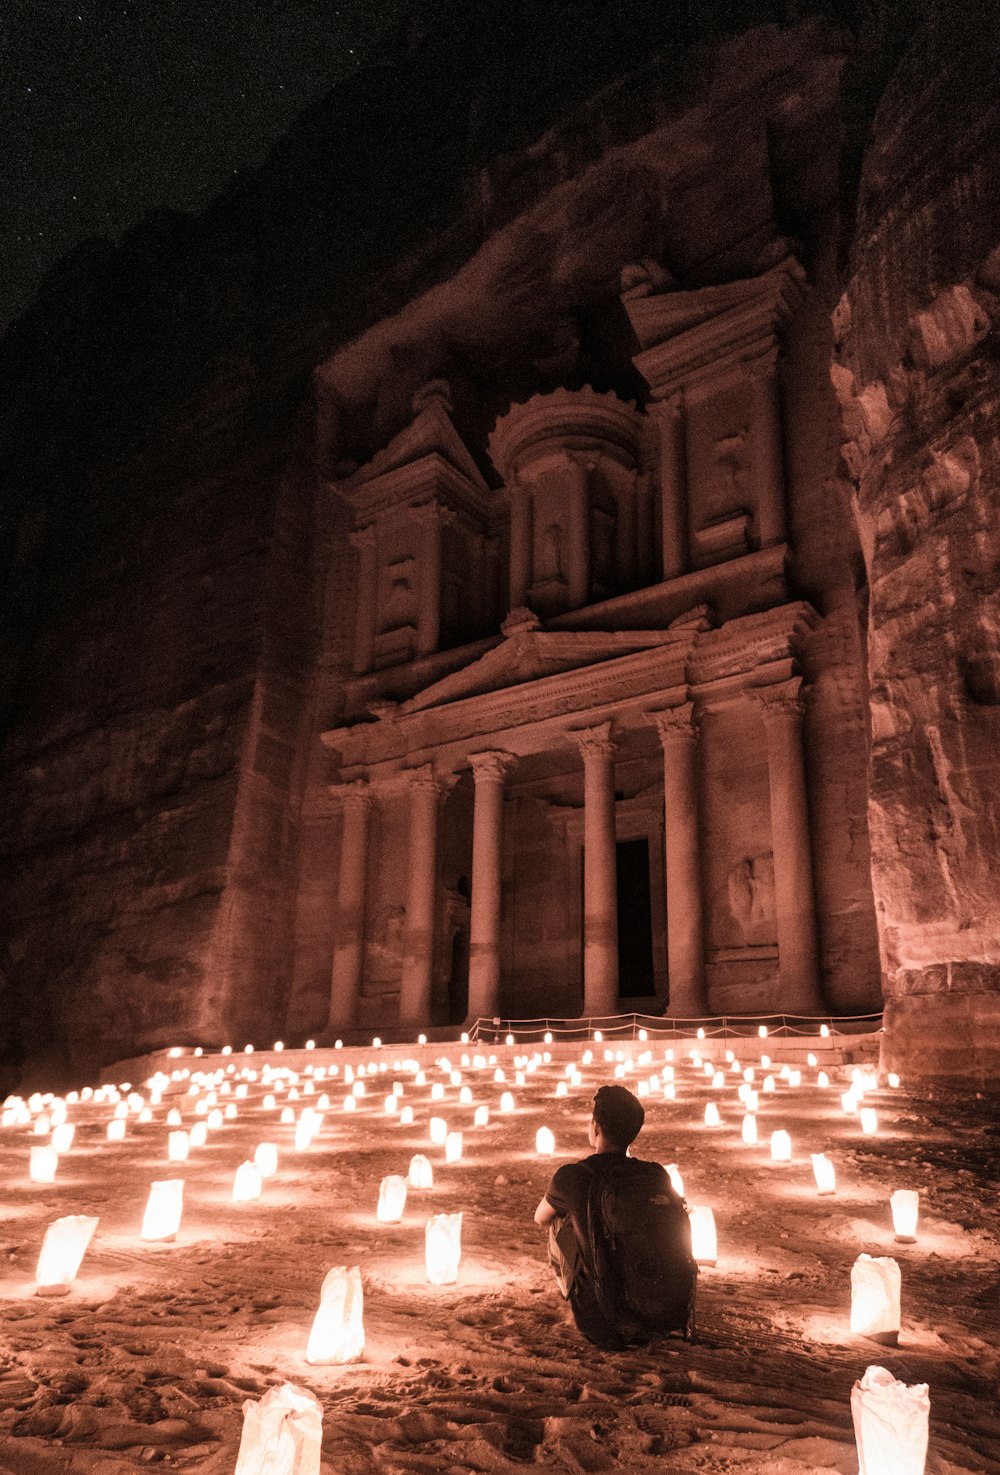 man sitting on ground surrounded by lantern lamp lot outside buildings